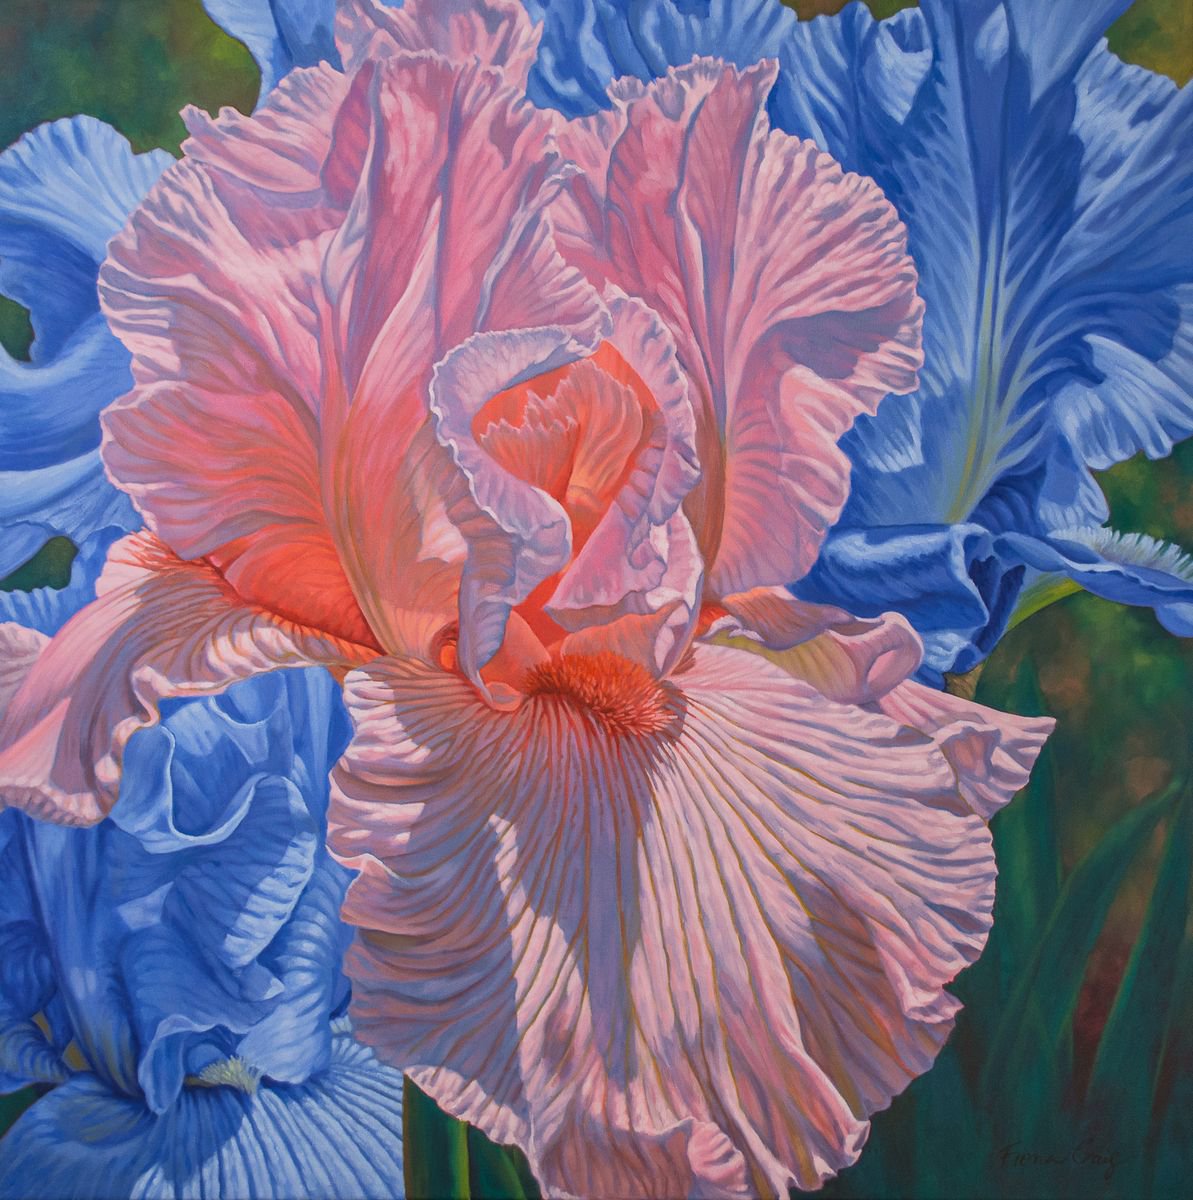 Floralscape 1: Pink and Blue Irises by Fiona Craig